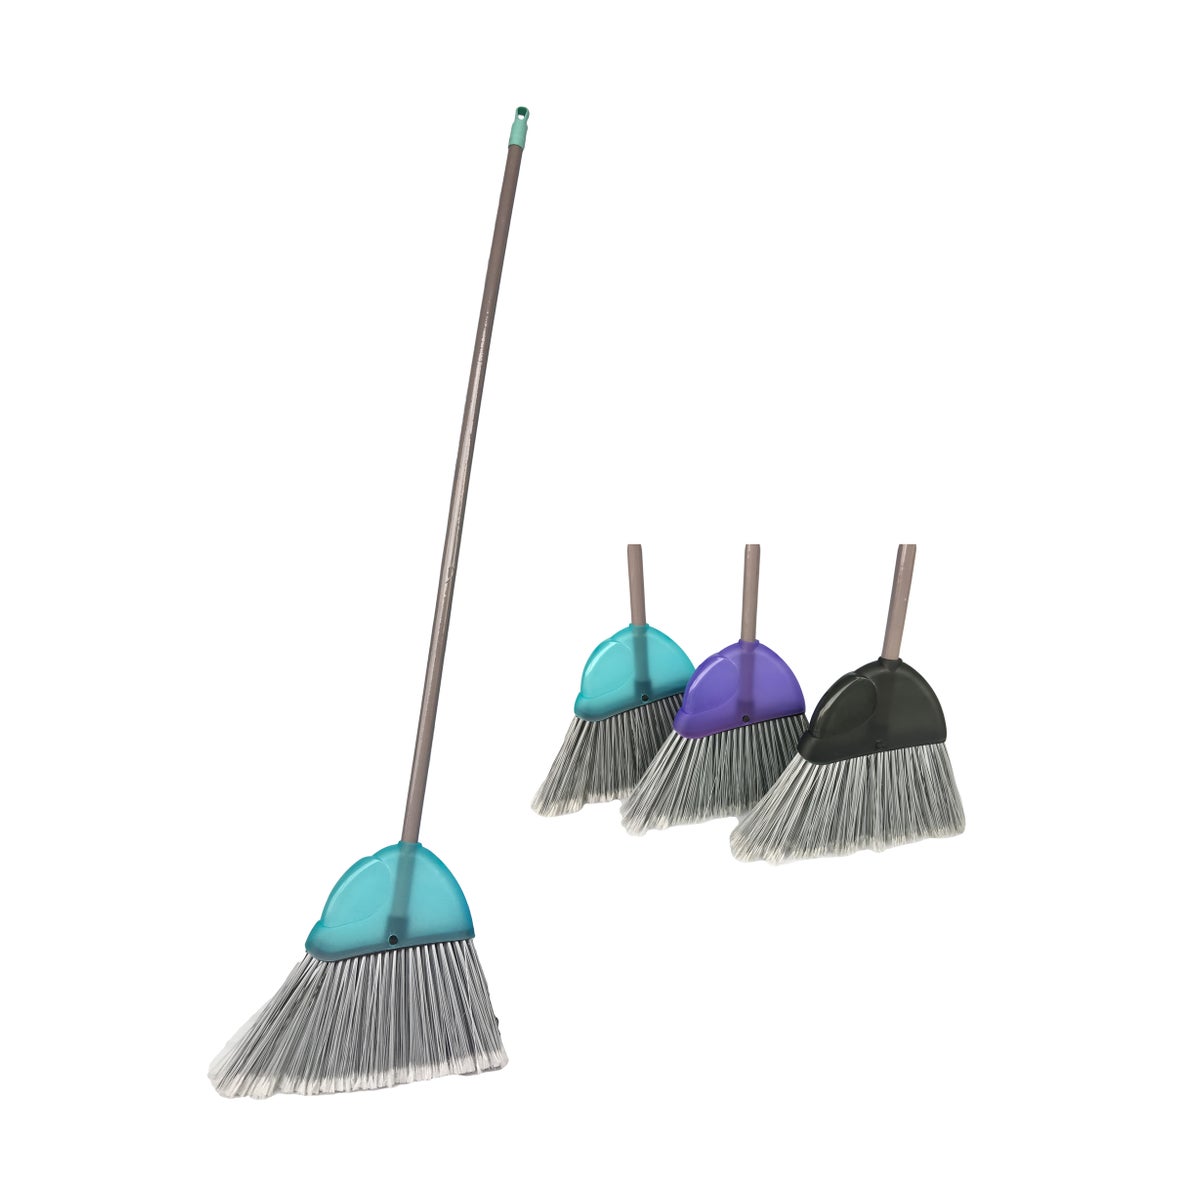 Large Transparent Angle Broom Assorted Colors (12)